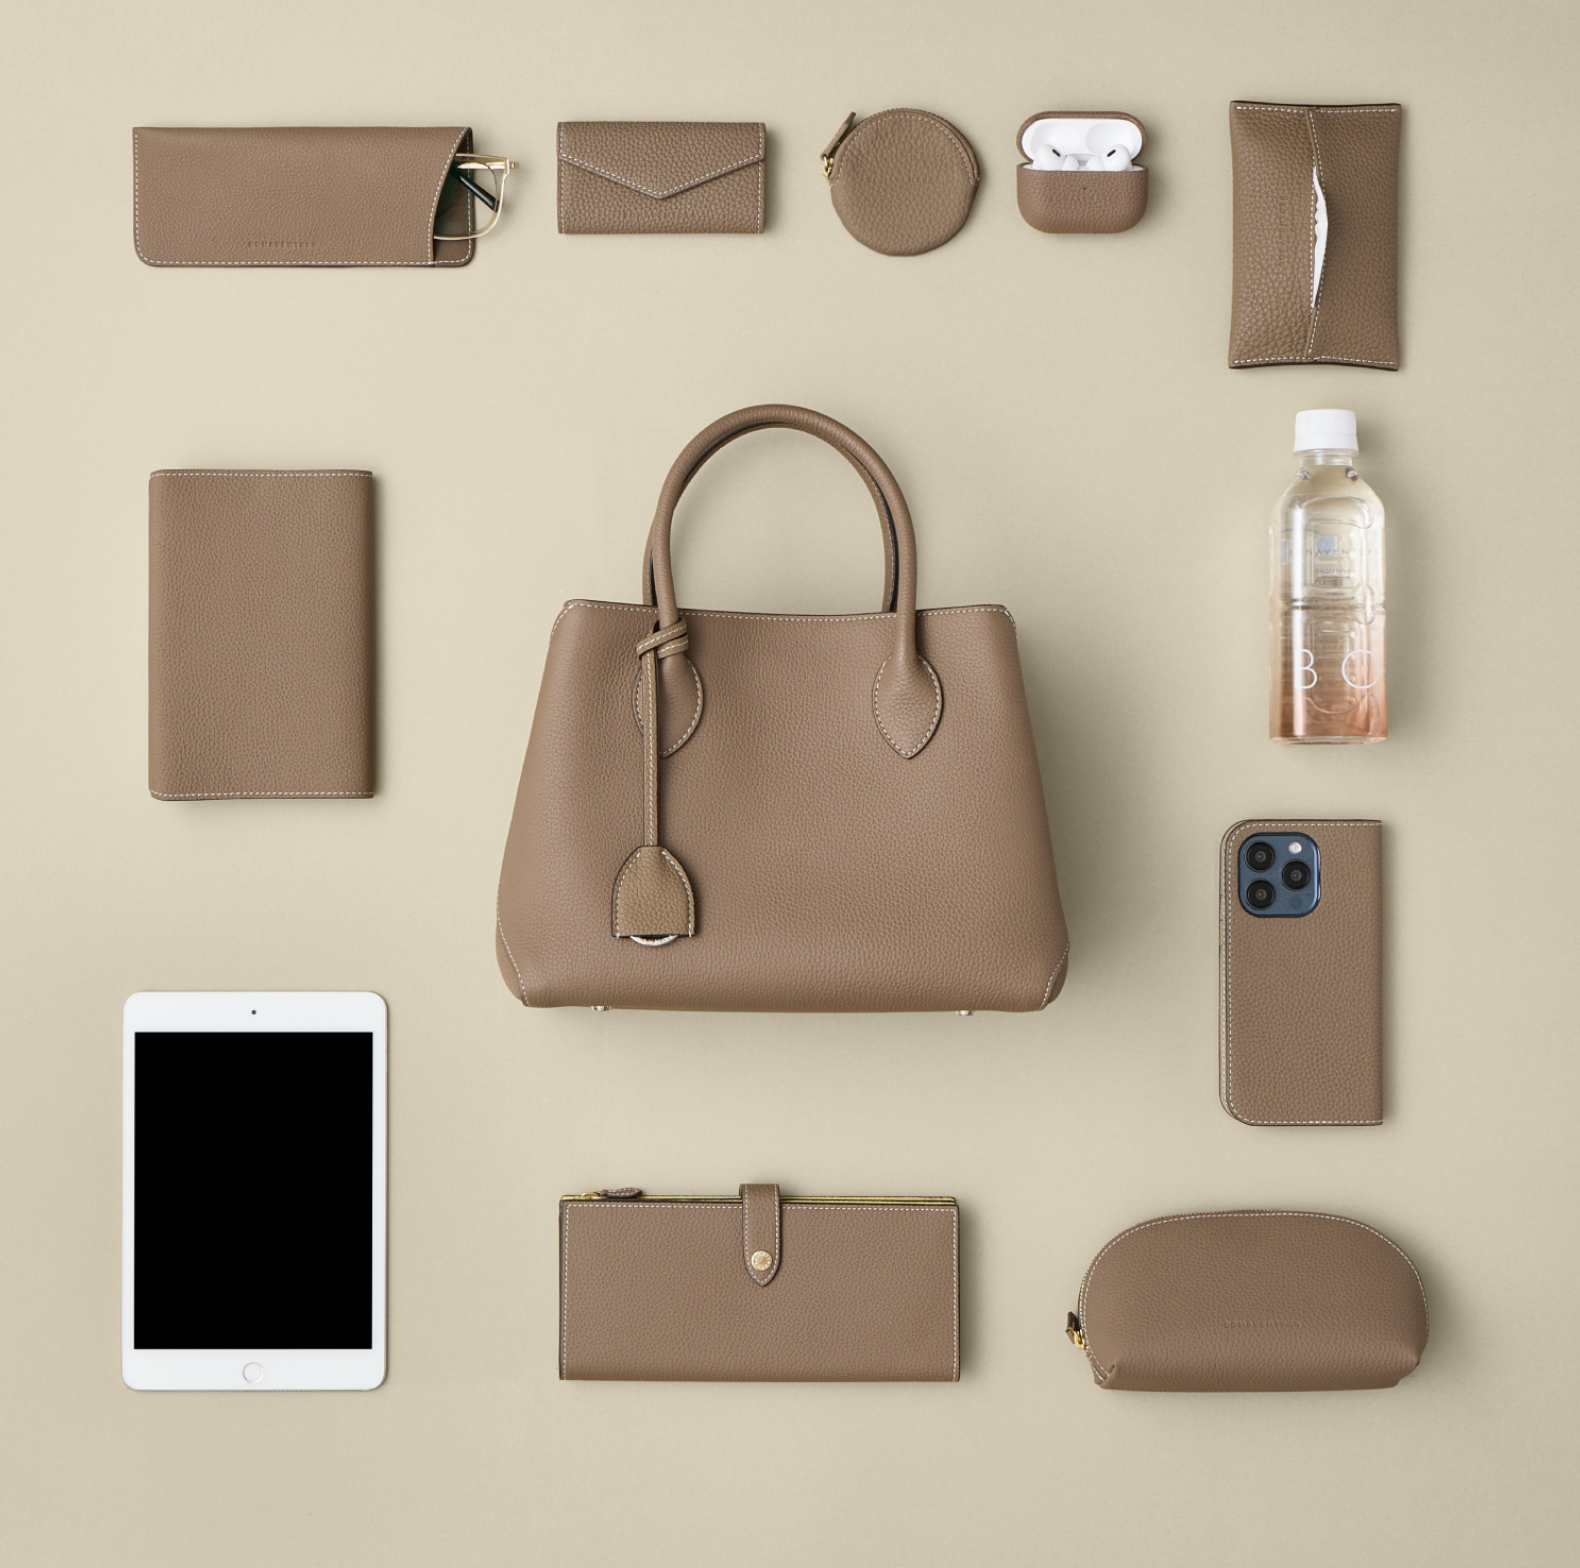 High-quality leather accessories as essential components of a capsule wardrobe